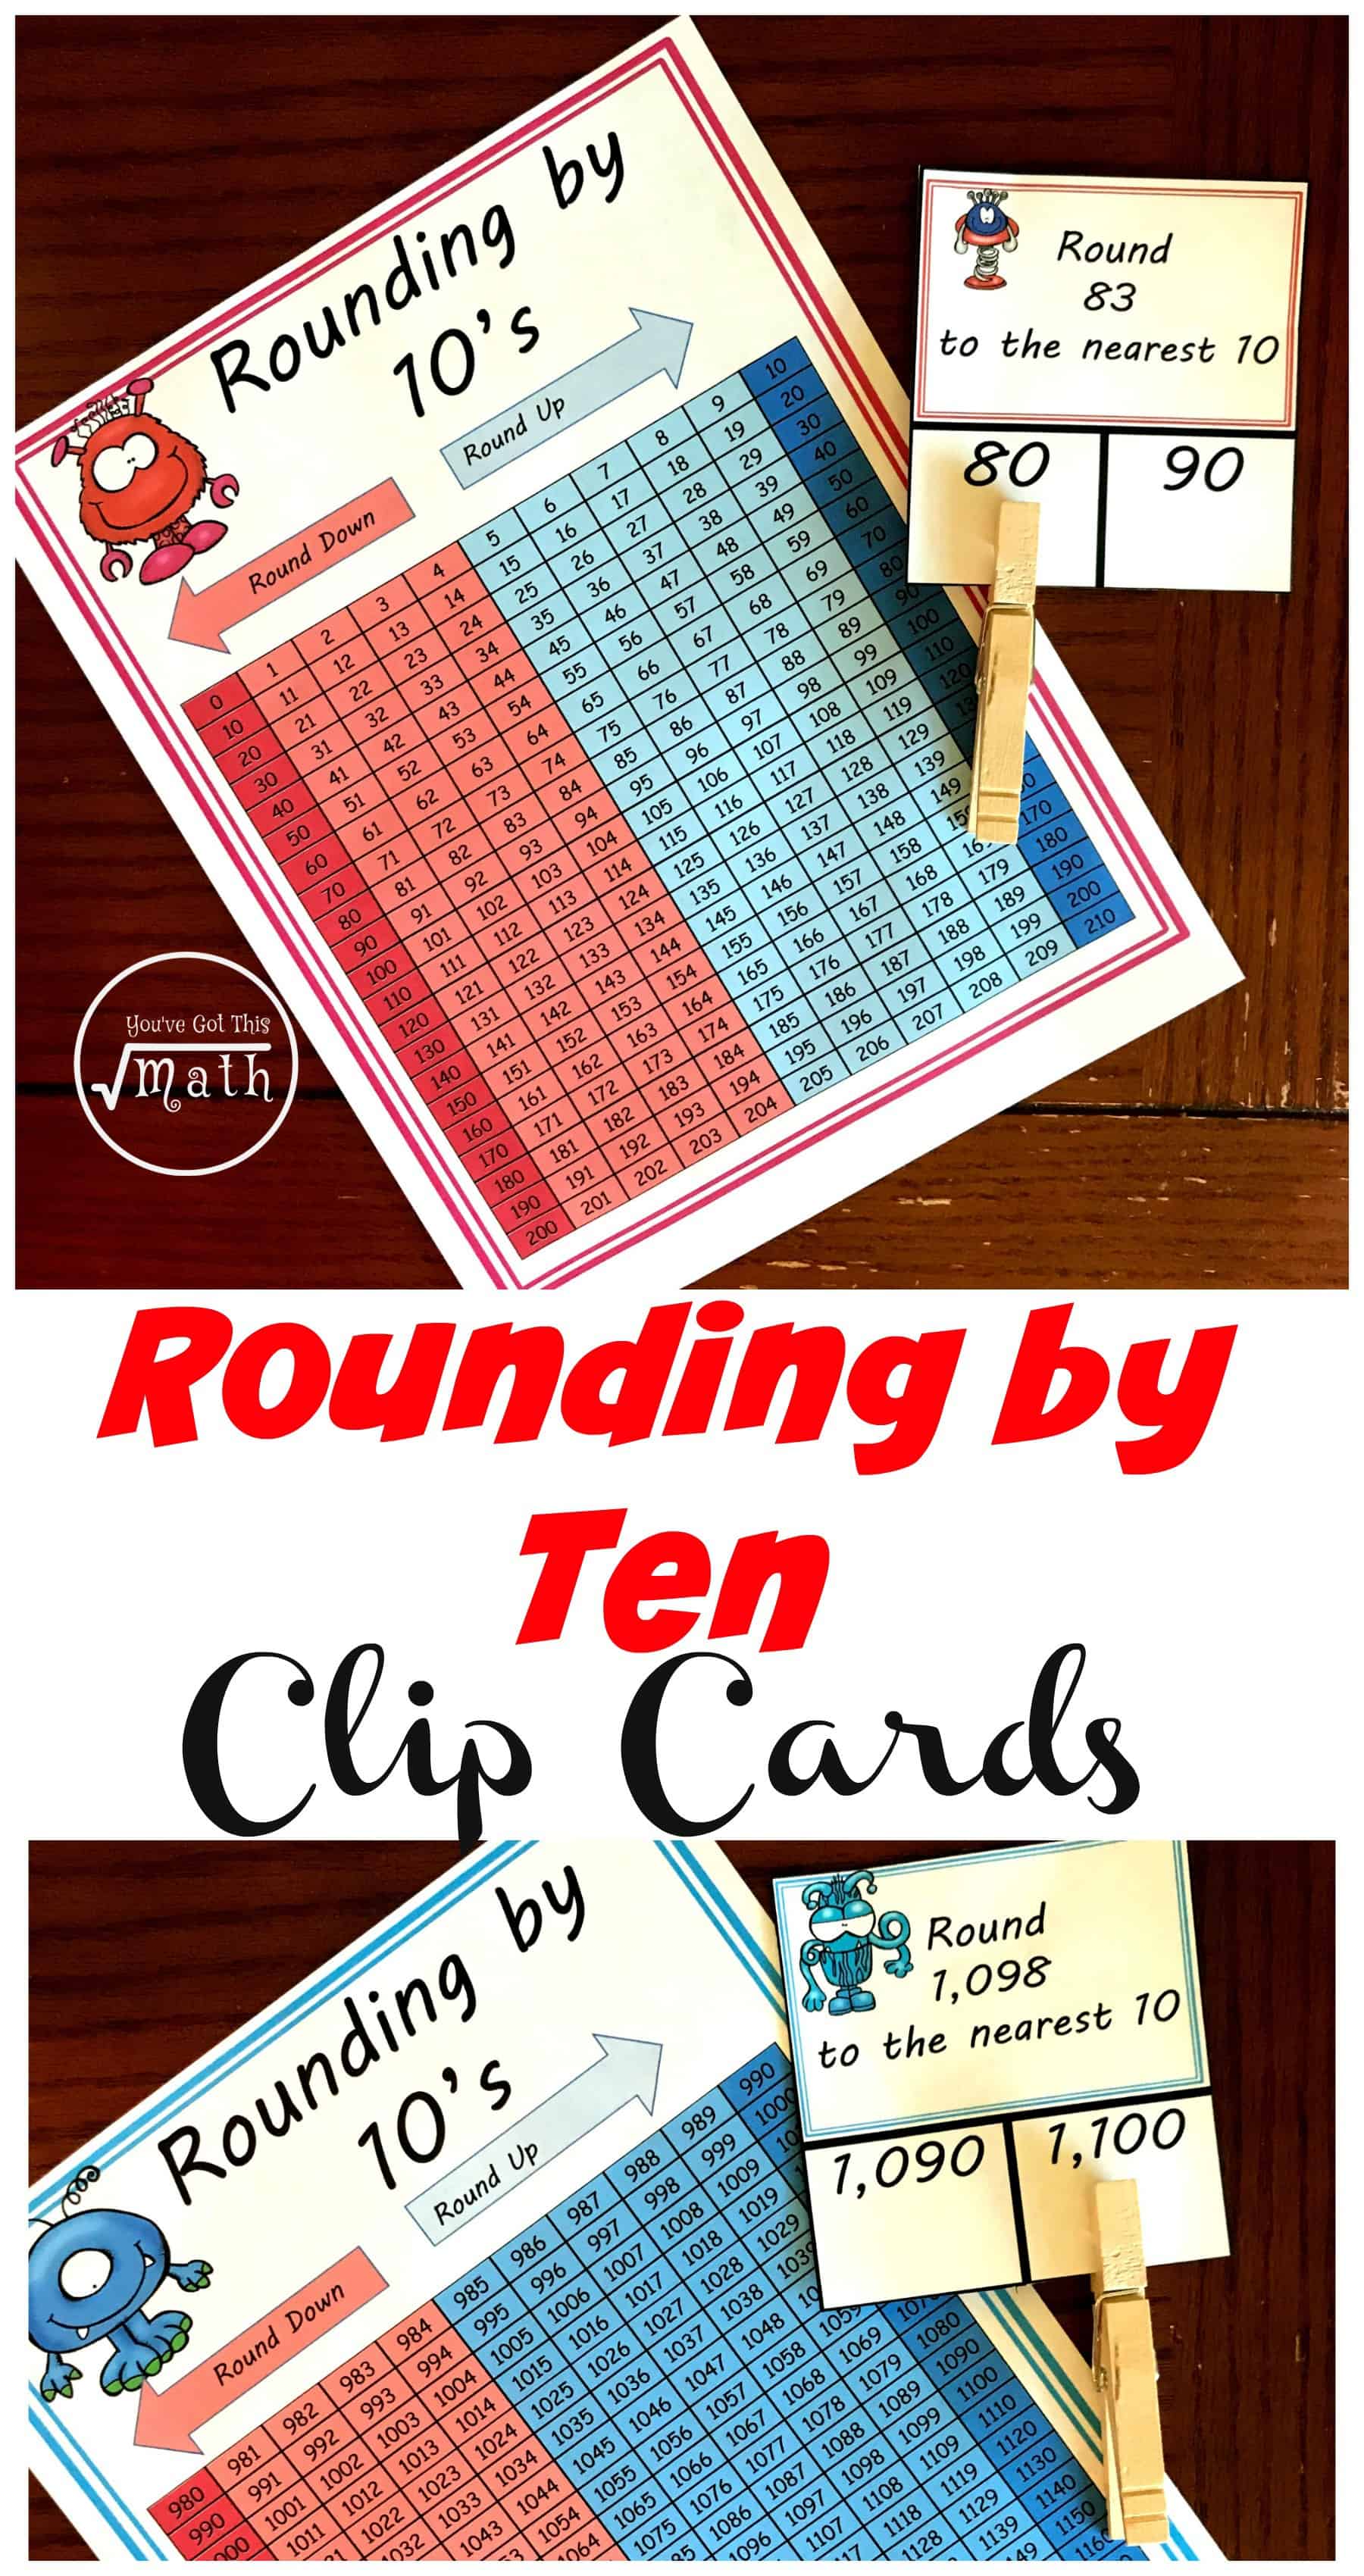 These rounding by 10 clip cards help children practice rounding while using a hundreds chart. Children practice rounding in two-digit numbers (tens) three digit numbers (hundreds) and three-digit numbers (thousands).